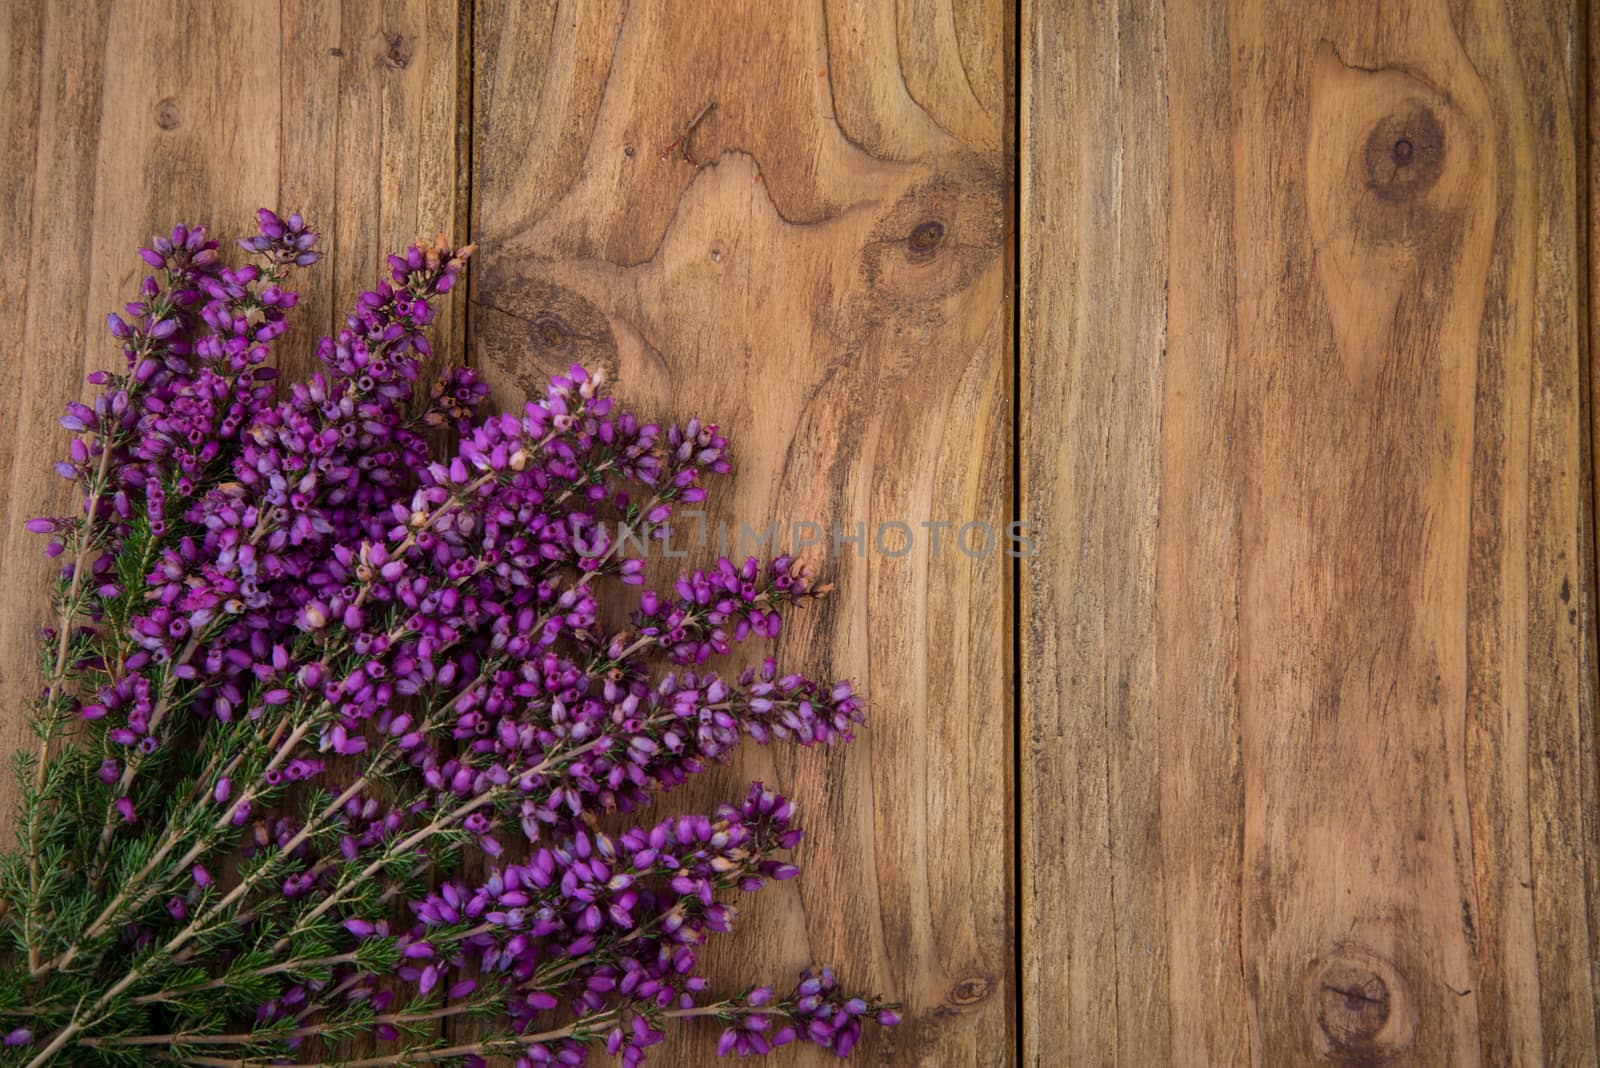 Purple and viola heather flowers on wooden table